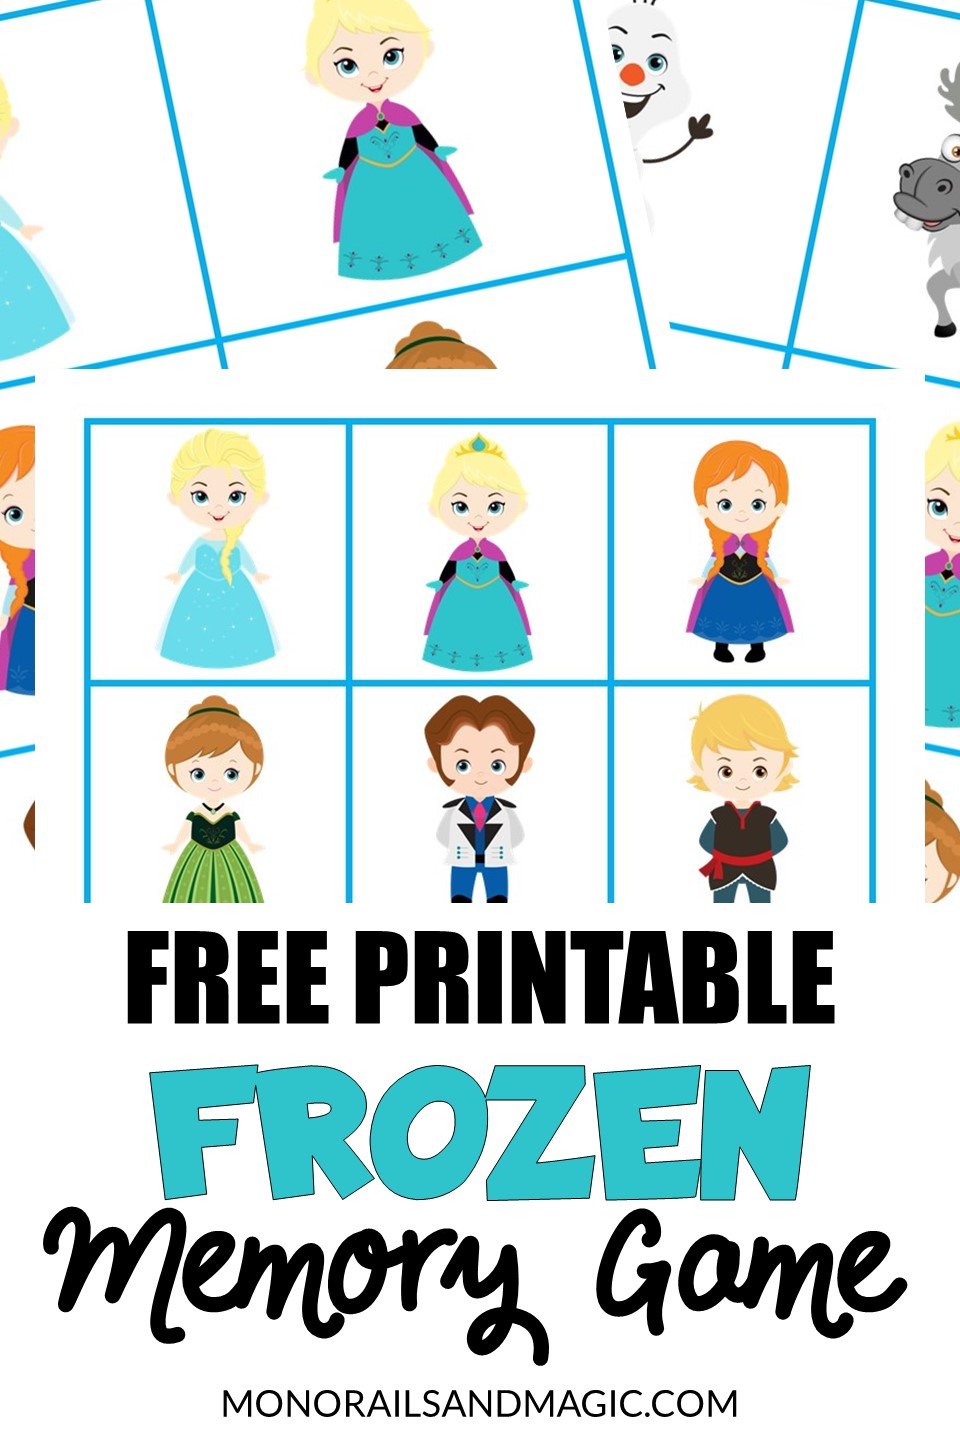 Free printable Frozen memory game for kids.